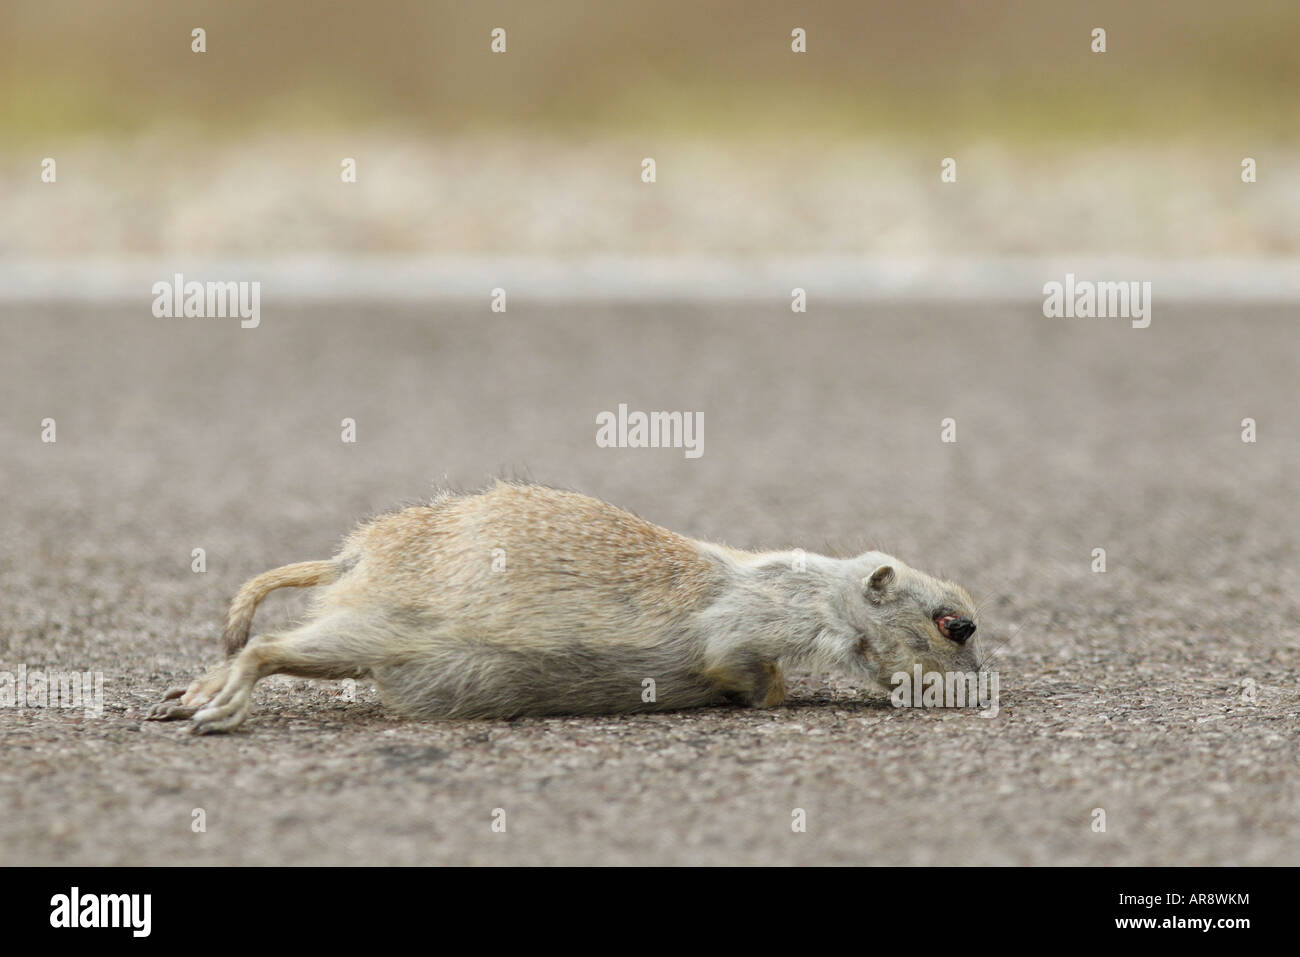 A dead prairie dog the was struck by a car in The Badlands National Park, South Dakota, USA Stock Photo